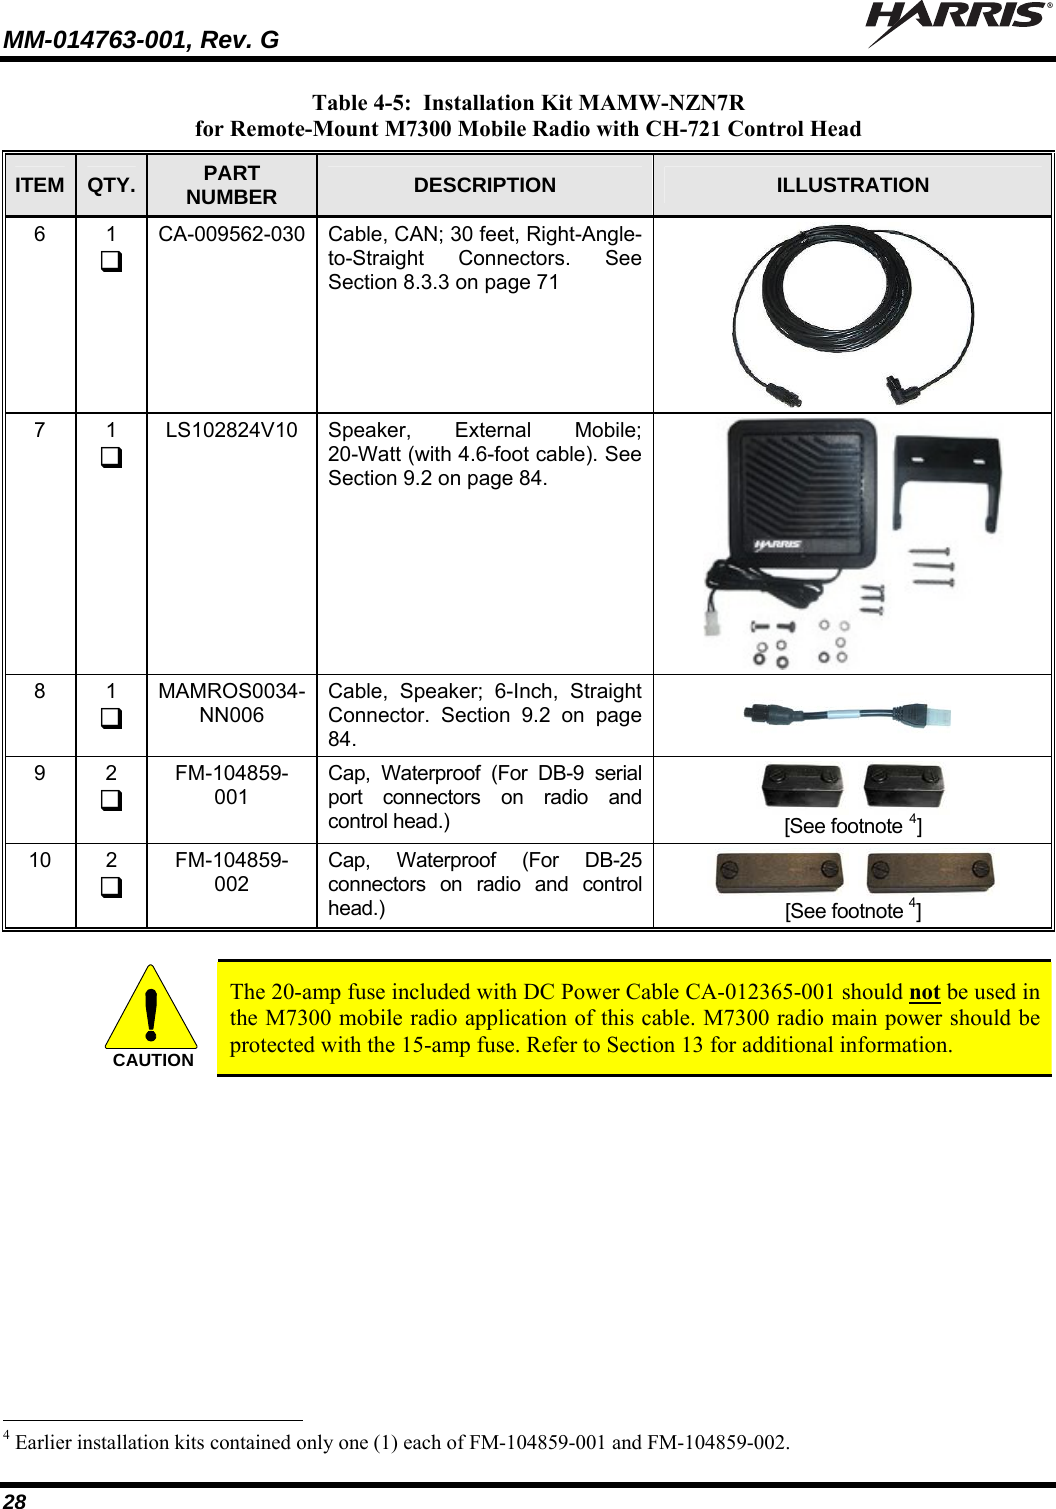 MM-014763-001, Rev. G   28 Table 4-5:  Installation Kit MAMW-NZN7R for Remote-Mount M7300 Mobile Radio with CH-721 Control Head ITEM  QTY.  PART NUMBER  DESCRIPTION  ILLUSTRATION 6  1  CA-009562-030  Cable, CAN; 30 feet, Right-Angle-to-Straight Connectors. See Section 8.3.3 on page 71  7  1  LS102824V10  Speaker, External Mobile; 20-Watt (with 4.6-foot cable). See Section 9.2 on page 84.  8  1  MAMROS0034-NN006 Cable, Speaker; 6-Inch, Straight Connector. Section 9.2 on page 84.   9  2  FM-104859-001 Cap, Waterproof (For DB-9 serial port connectors on radio and control head.)       [See footnote 4] 10  2  FM-104859-002 Cap, Waterproof (For DB-25 connectors on radio and control head.)       [See footnote 4]  CAUTION  The 20-amp fuse included with DC Power Cable CA-012365-001 should not be used in the M7300 mobile radio application of this cable. M7300 radio main power should be protected with the 15-amp fuse. Refer to Section 13 for additional information.                                                             4 Earlier installation kits contained only one (1) each of FM-104859-001 and FM-104859-002. 